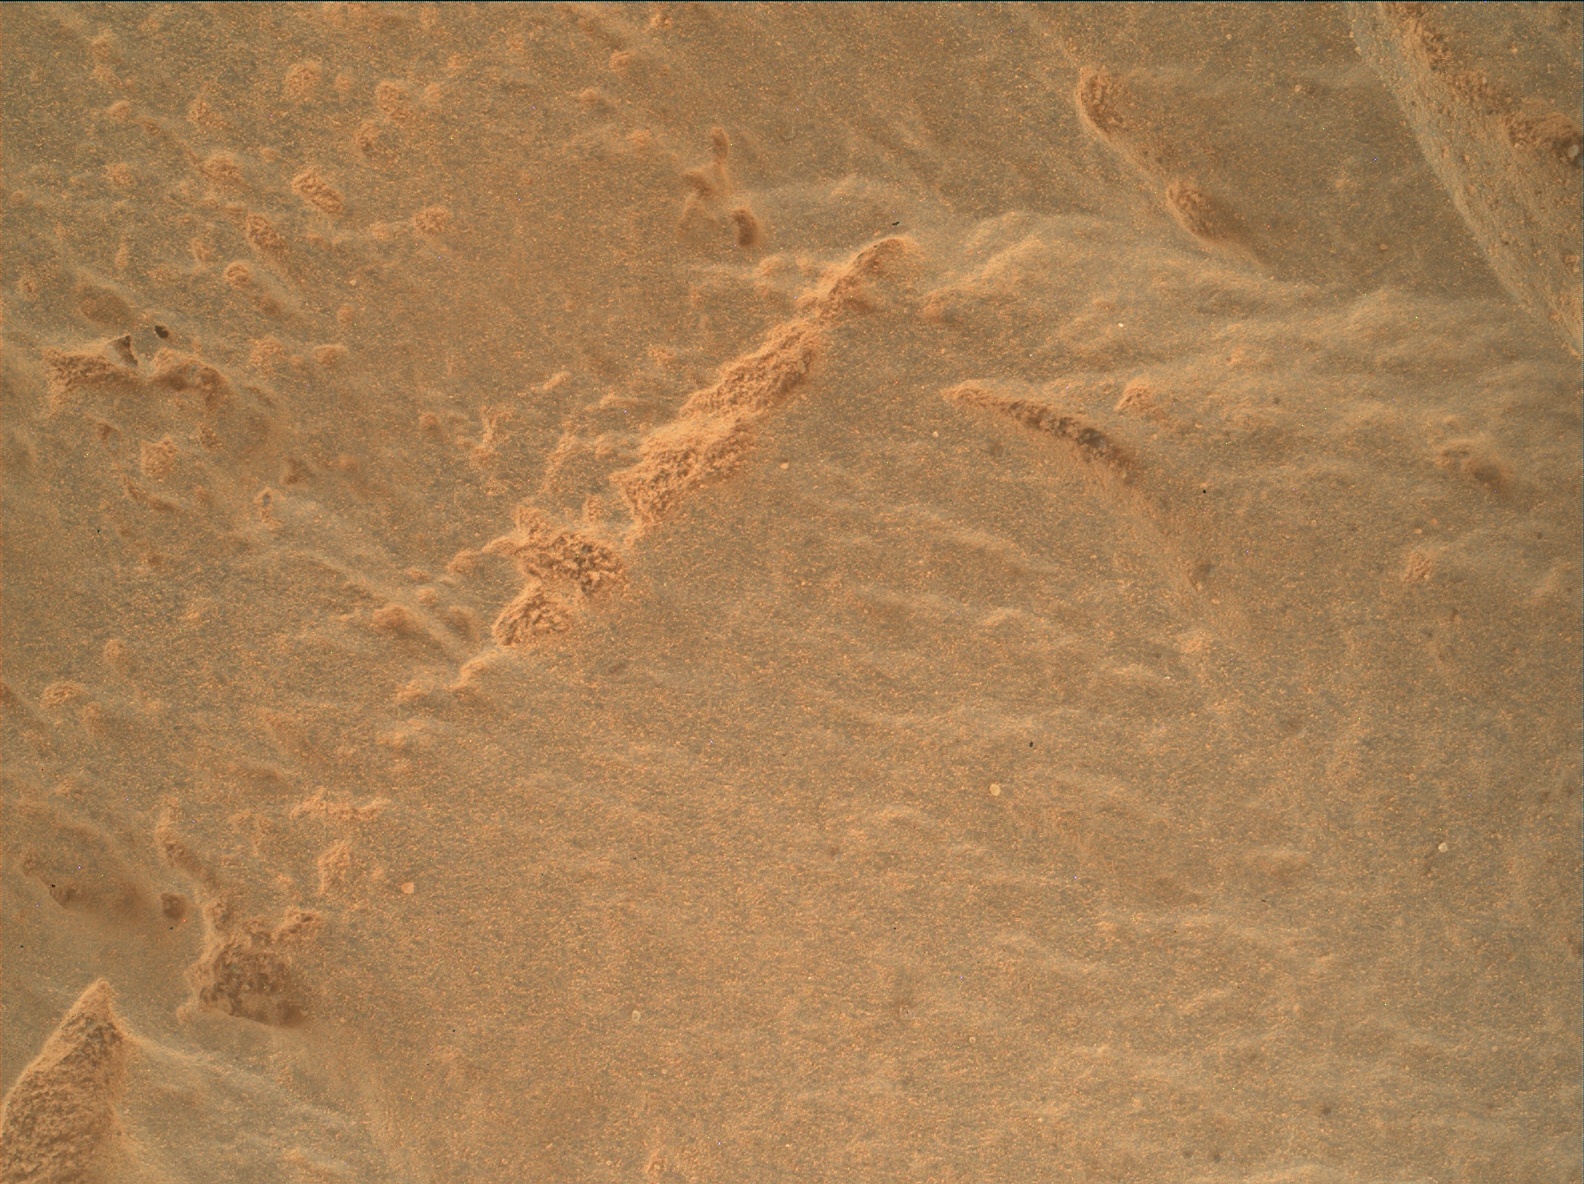 Nasa's Mars rover Curiosity acquired this image using its Mars Hand Lens Imager (MAHLI) on Sol 3436